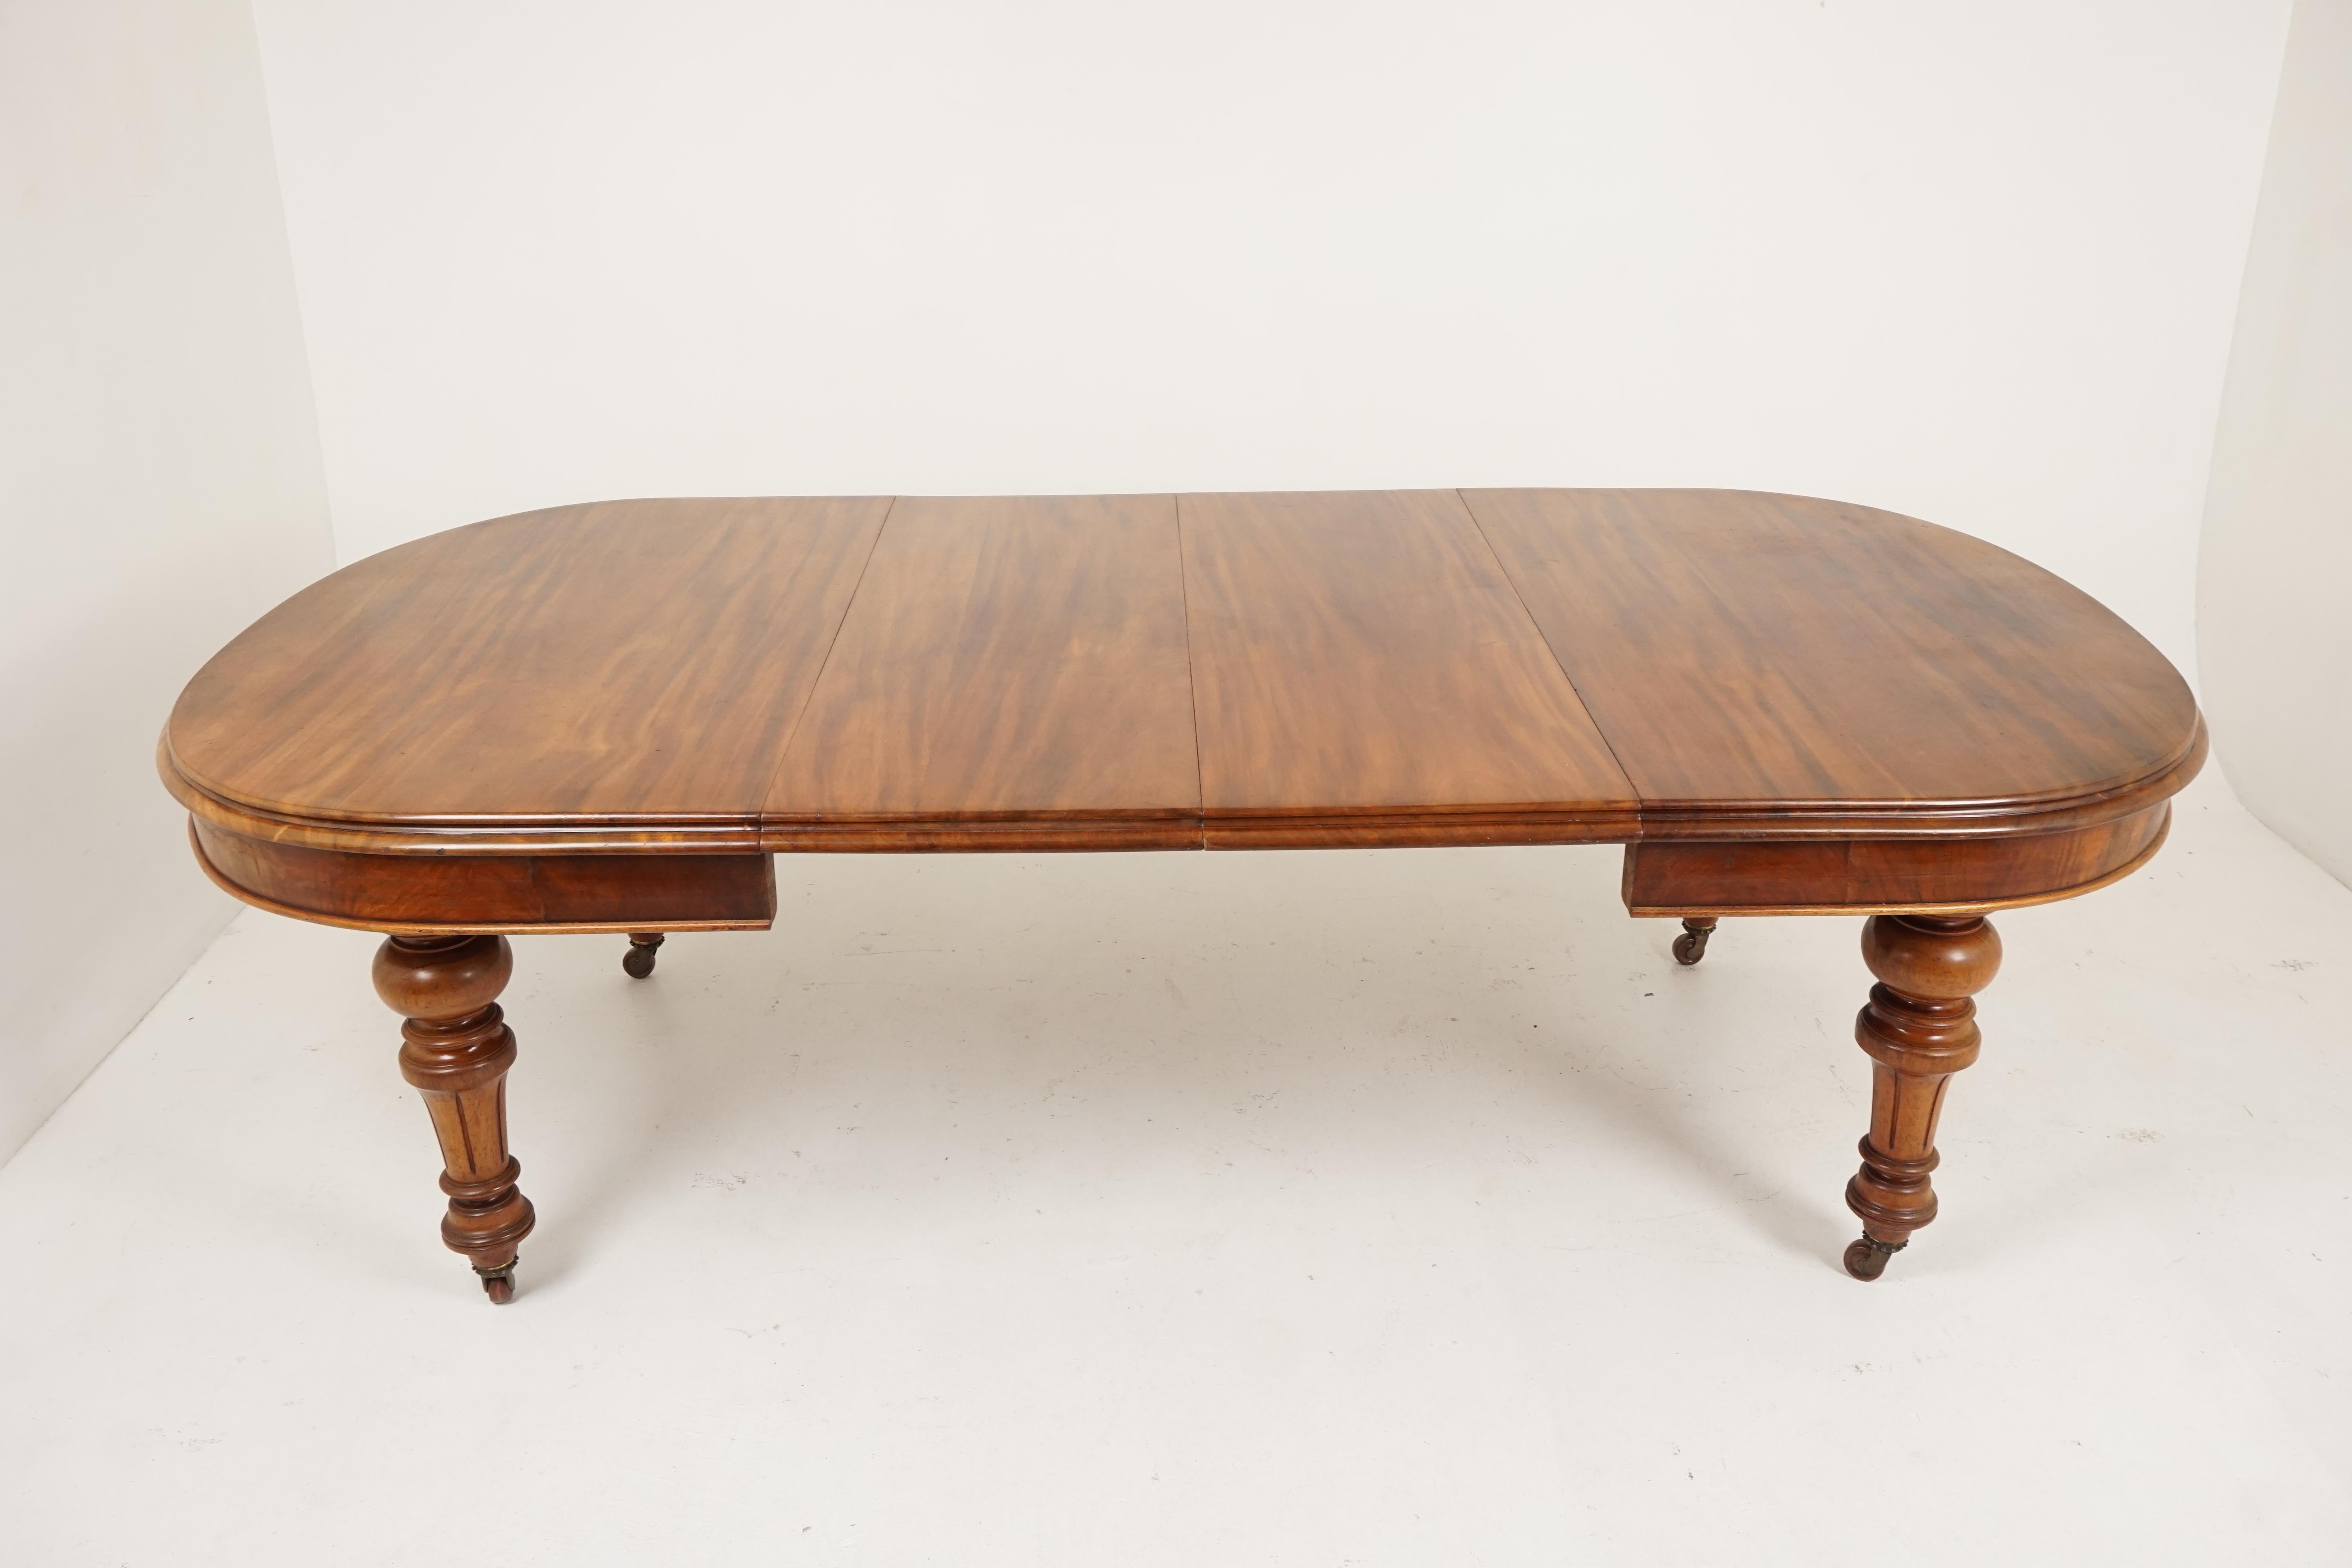 Late 19th Century Antique Victorian Walnut Extending Dining Table with 2 Leaves, Scotland, 1880